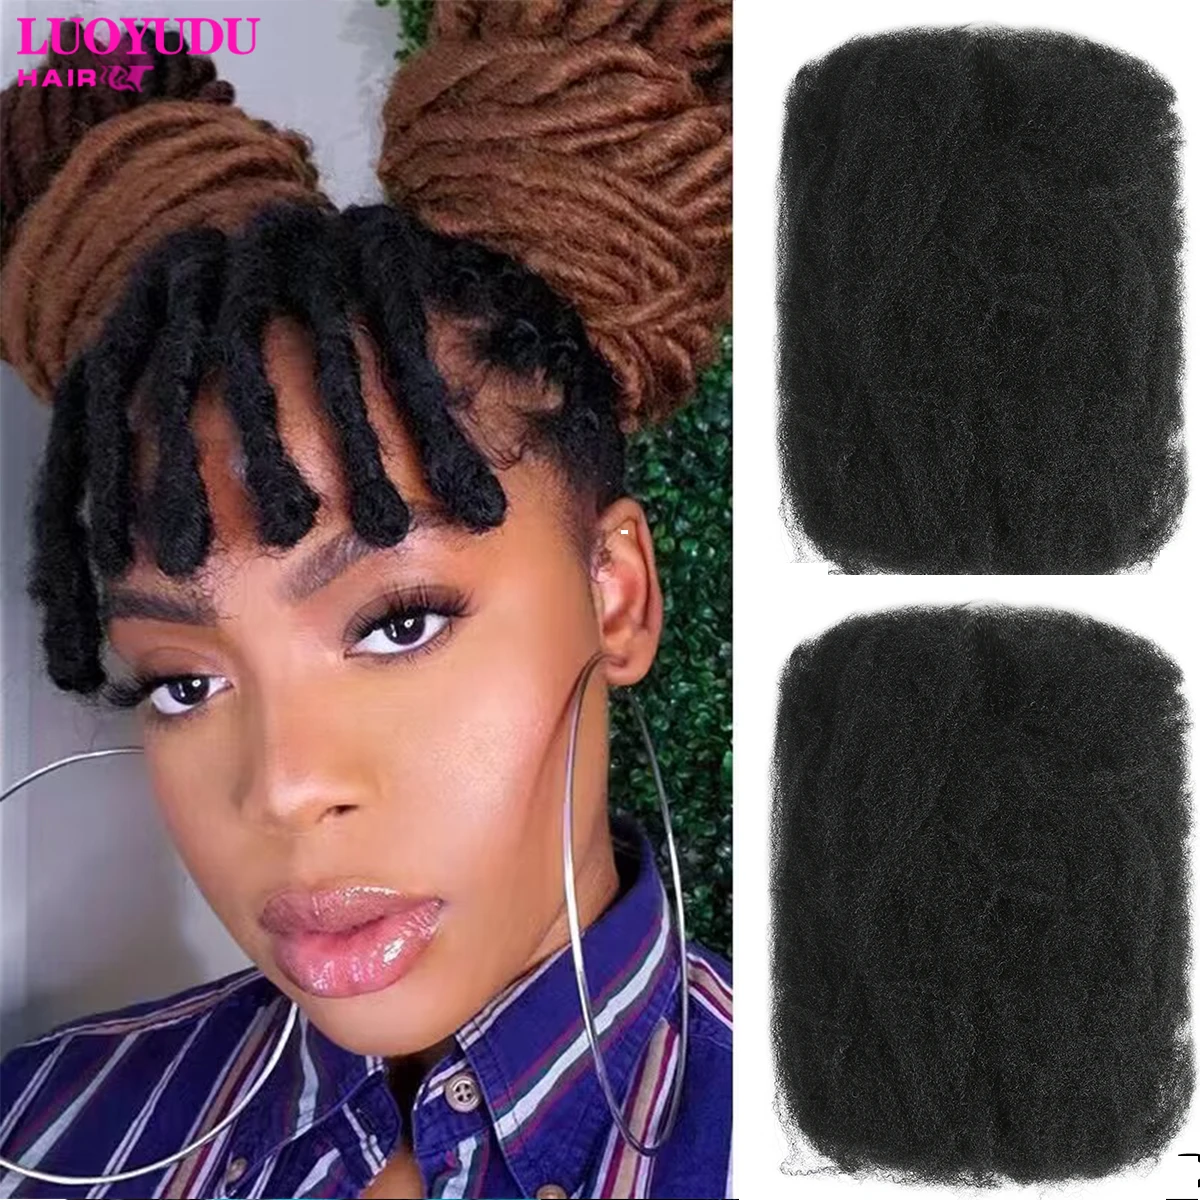 

For Junky Curl Afro kinky Curly Synthetic Braiding Hair Extensions For DIY Good Omens 50g/pcs For Dreadlocks Twist Braids Hair